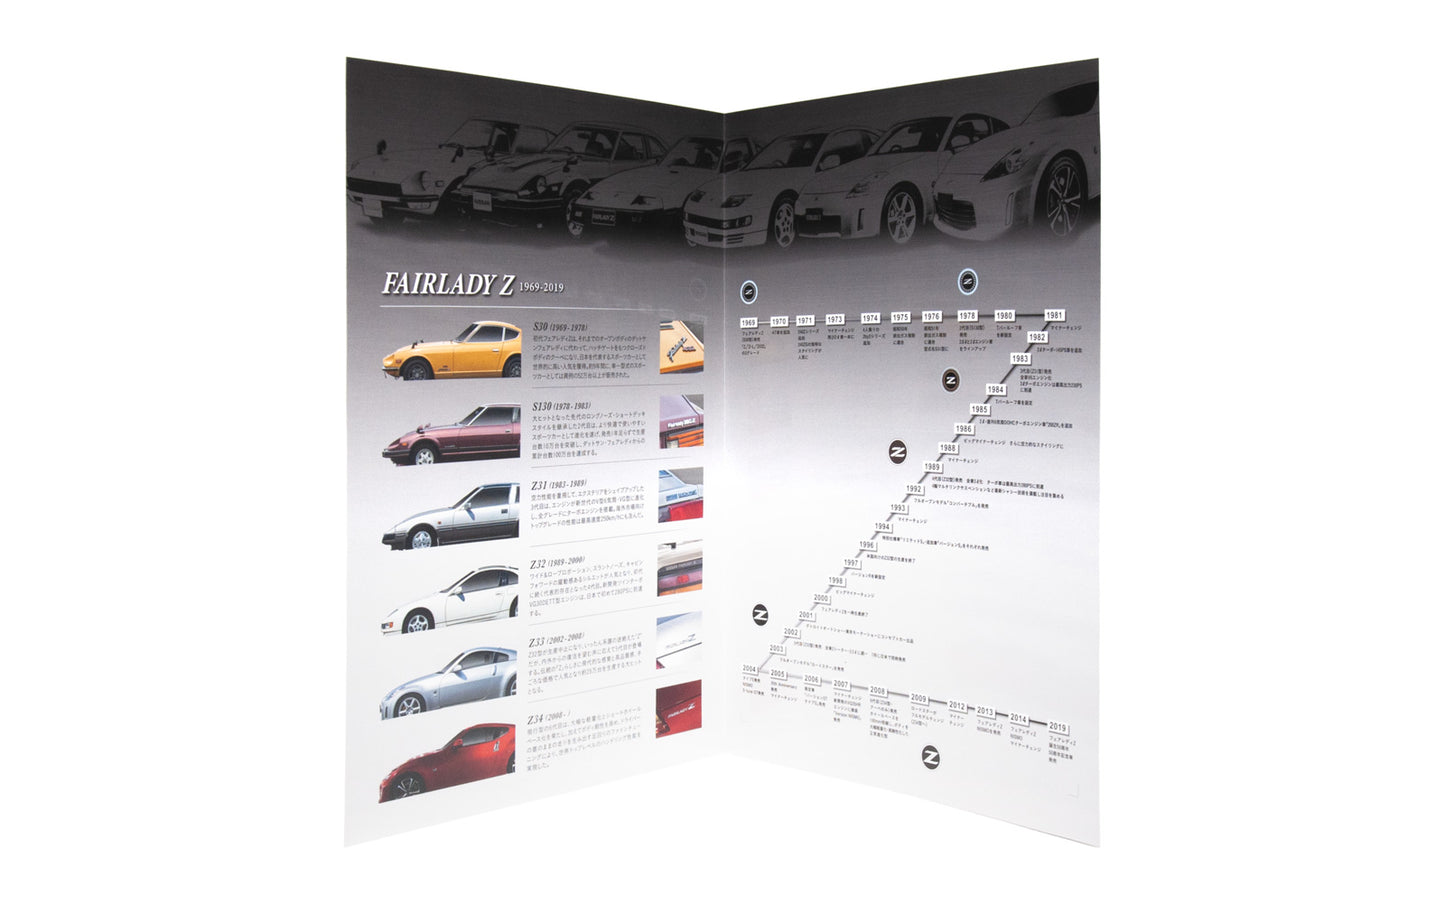 50th Anniversary Nissan Fairlady Z Postcard and Stamp Set